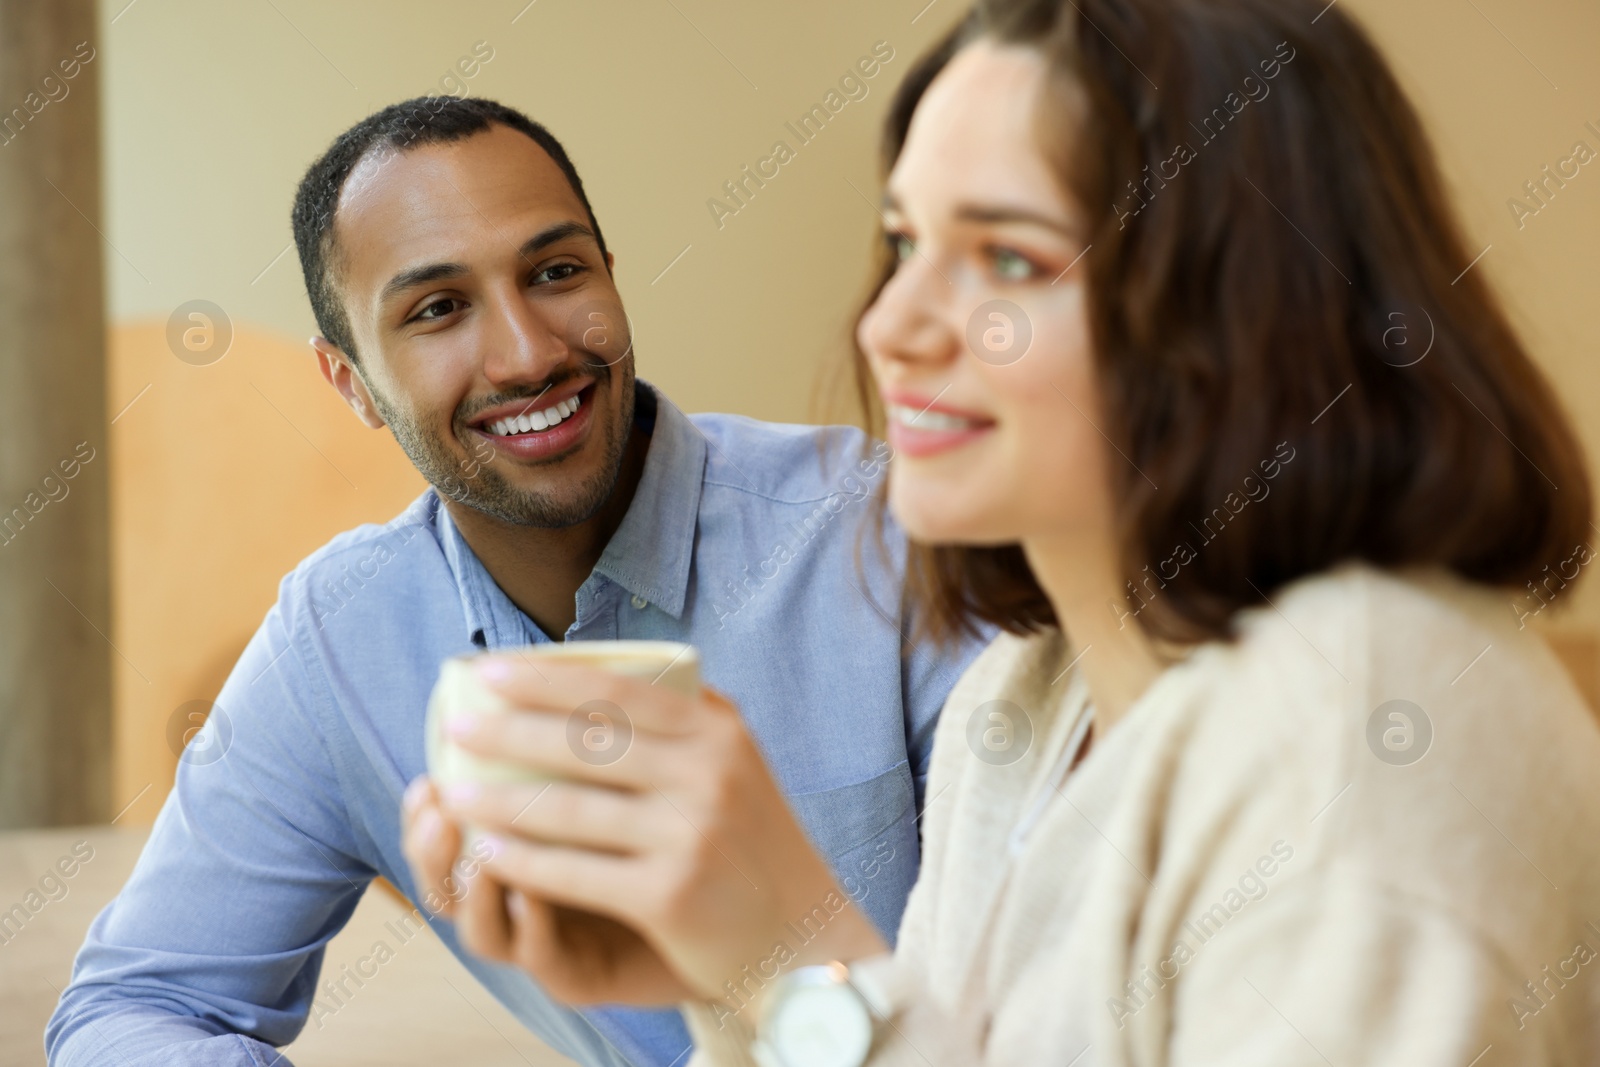 Photo of Romantic date. Happy couple spending time together in cafe